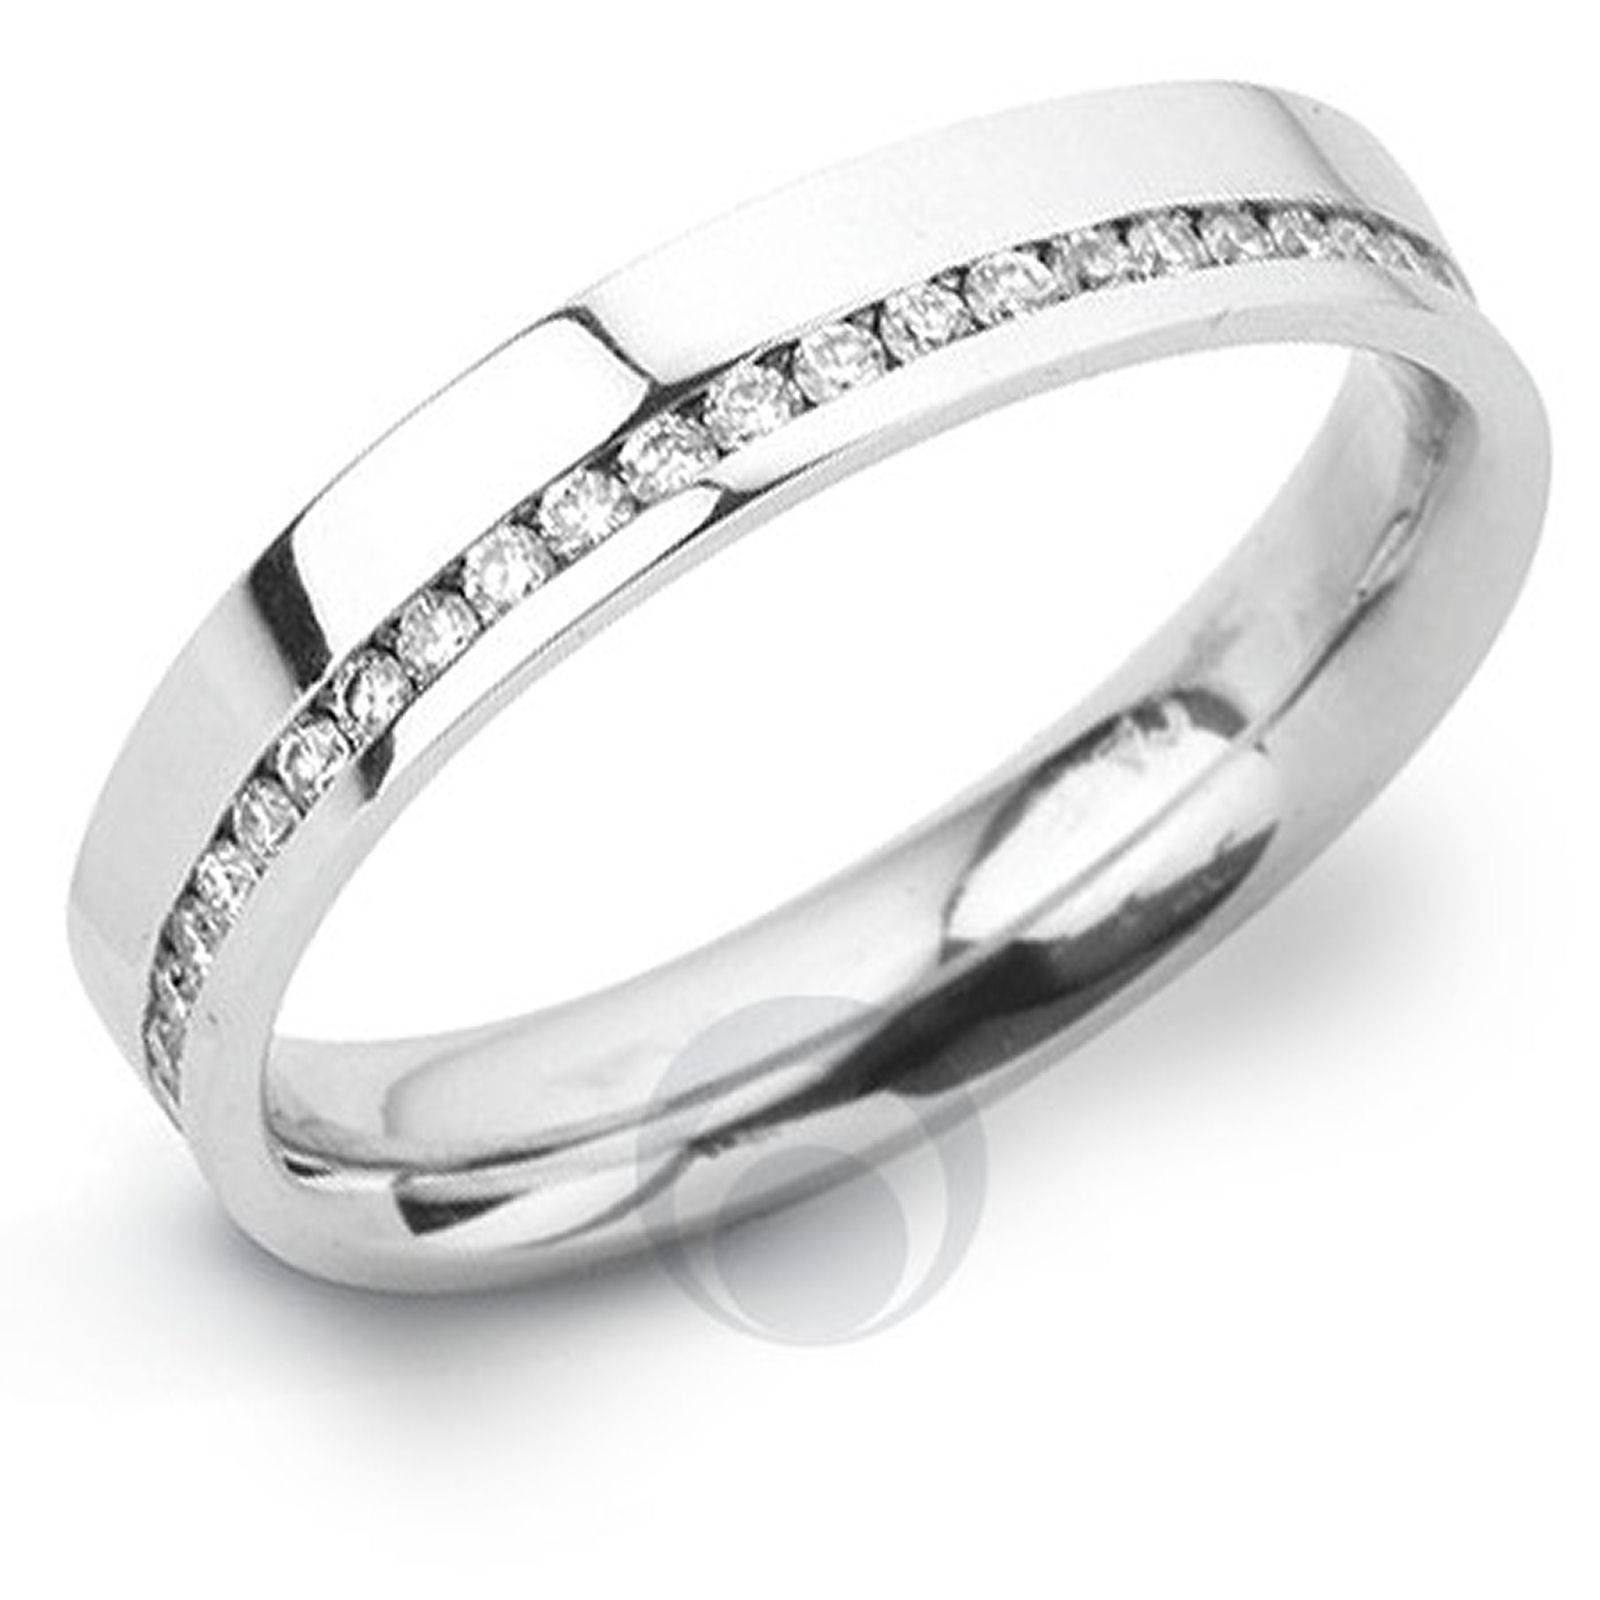 Channel Diamond Platinum Wedding Ring Wedding Dress From The Pertaining To Diamond And Platinum Wedding Rings (View 3 of 15)